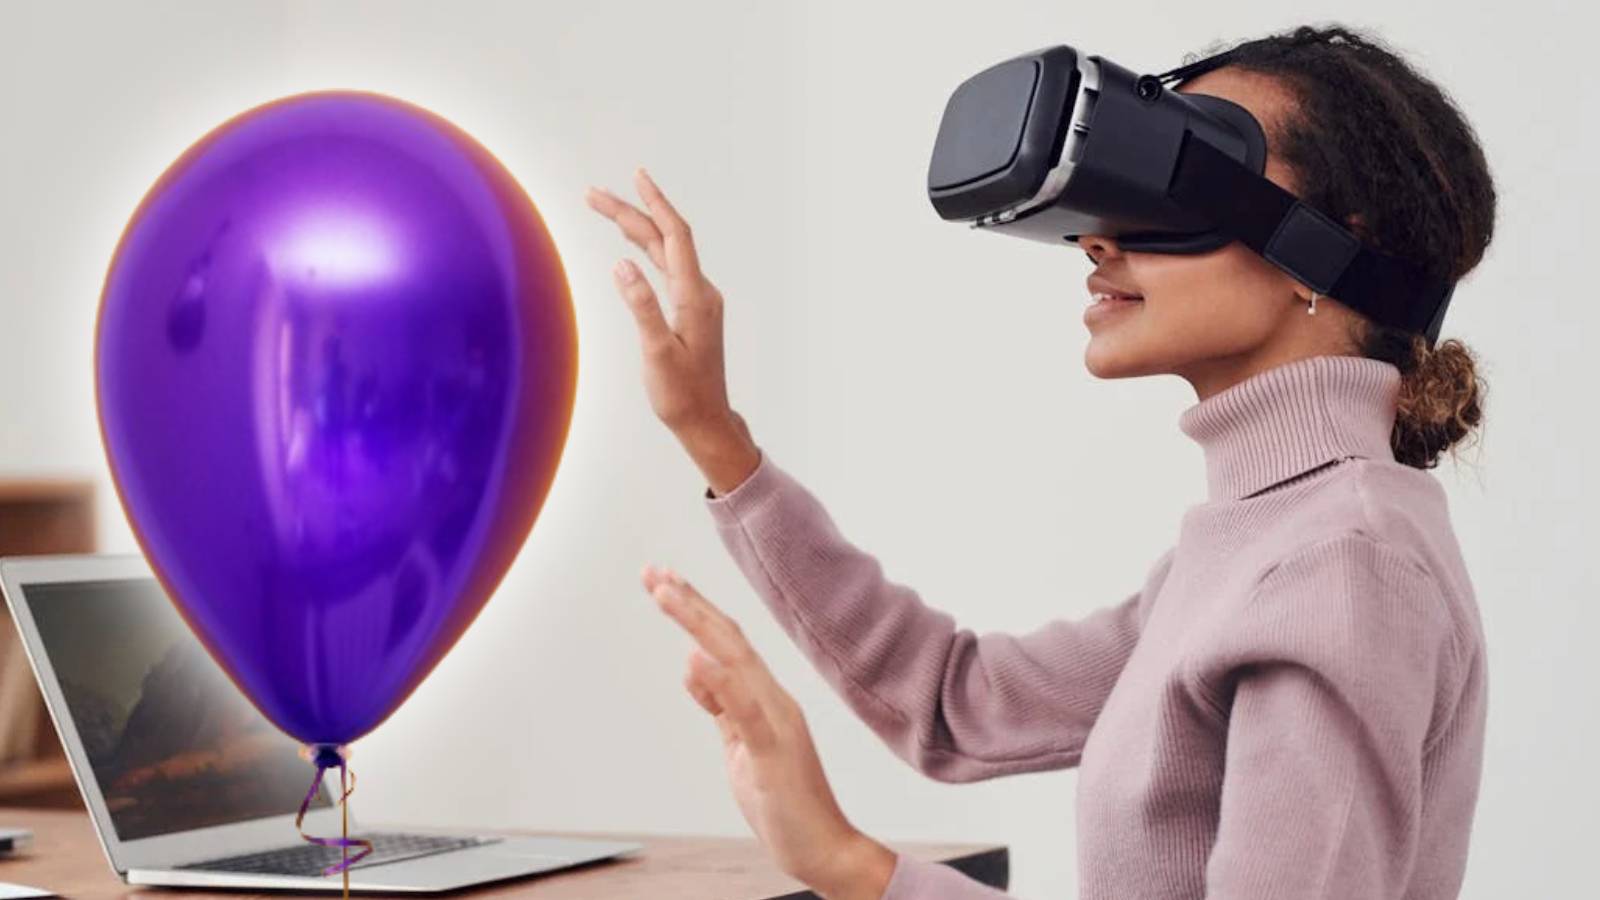 'Woman Using Virtual Reality Goggles' image by fauxels on pexels.com, with the image of a purple balloon by Deeana Arts on top.